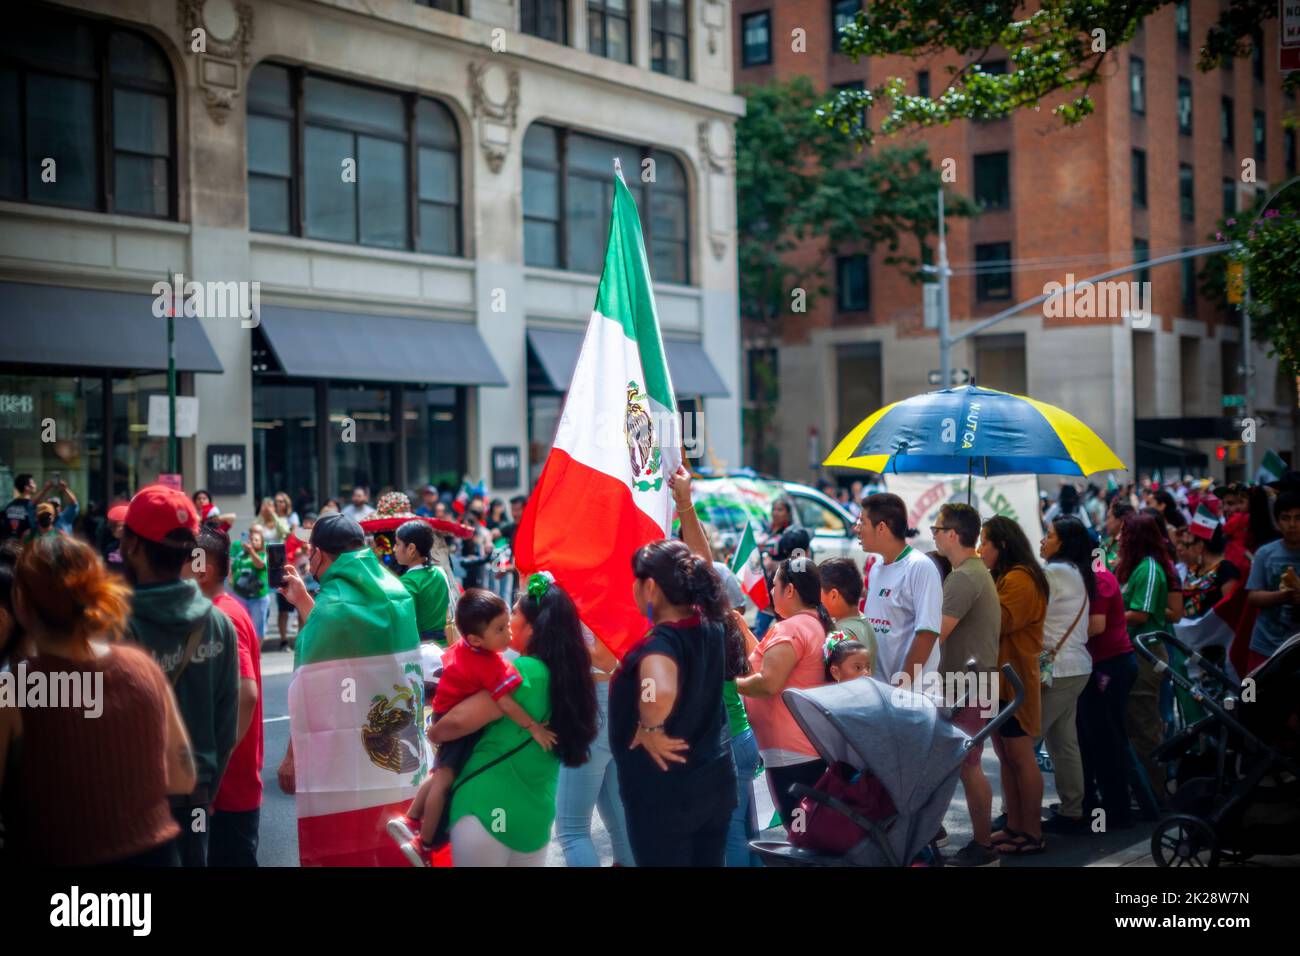 Mexican-Americans gather on Madison Avenue in New York on Sunday, September 18, 2022 for the annual Mexican Independence Day Parade. The parades that take place from the spring into the fall in New York celebrate the cultural diversity of the city. (© Richard B. Levine) Stock Photo